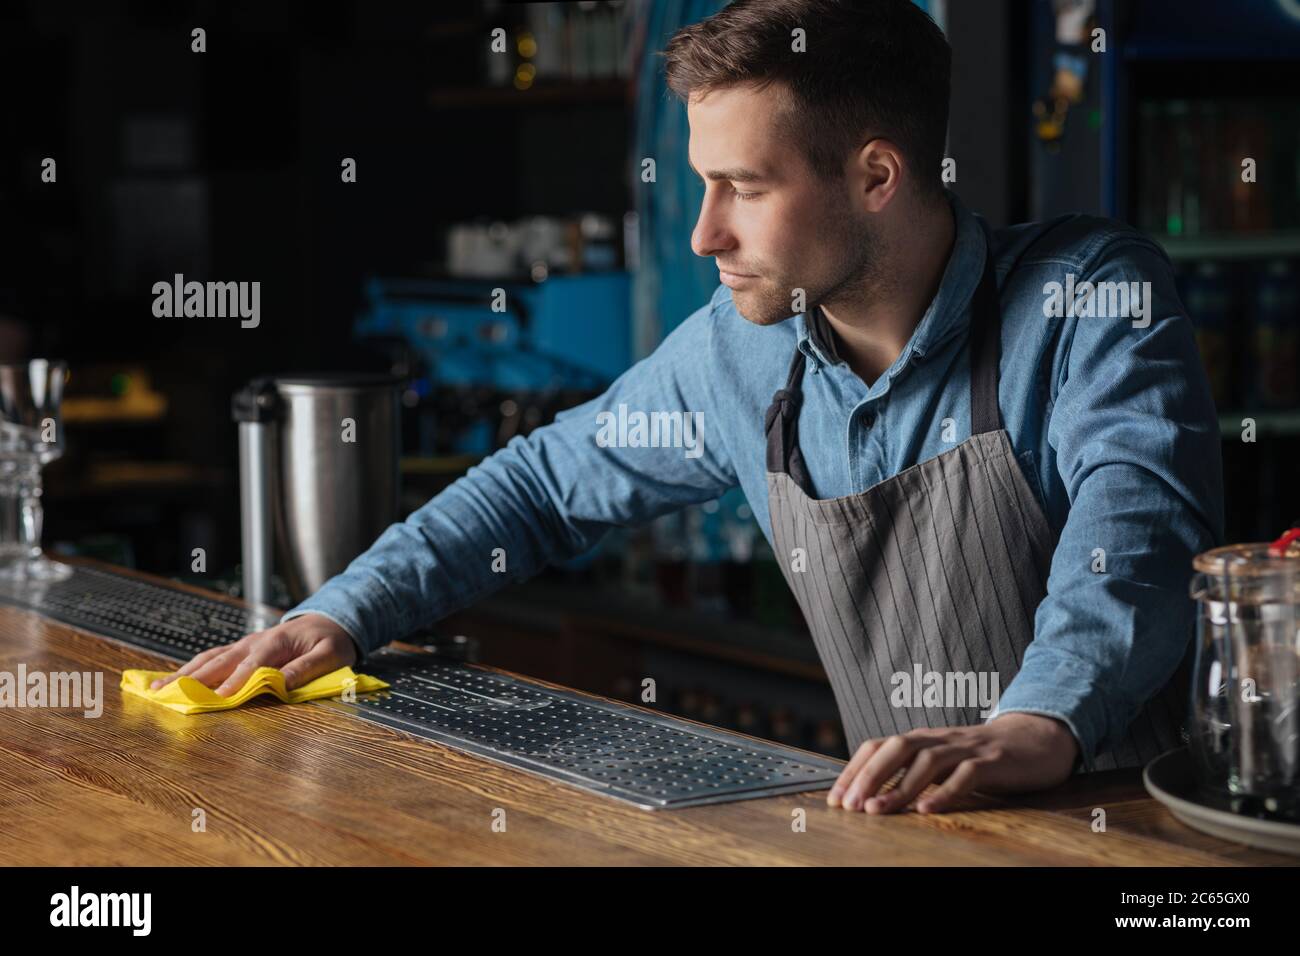 Cleanliness in pub. Professional bartender standing at counter, wiping wooden surface with rag Stock Photo